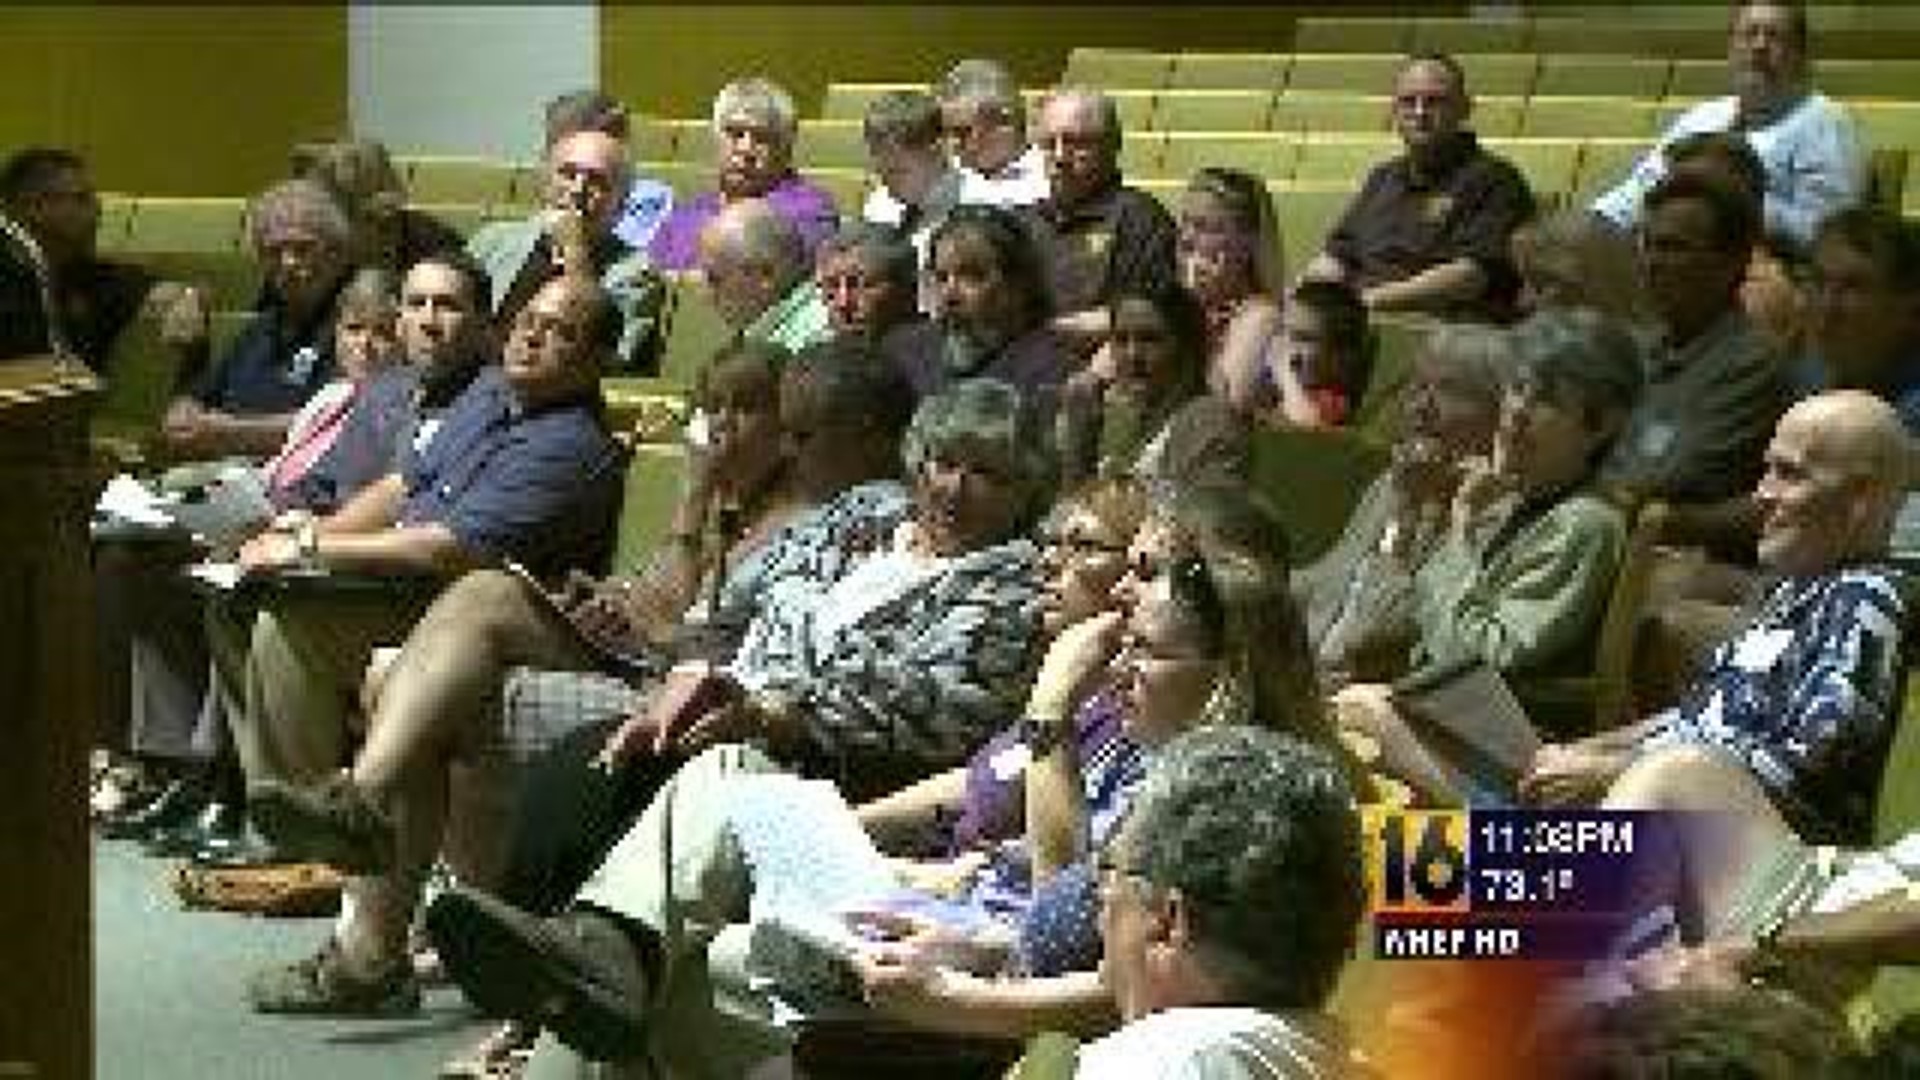 Borough Meeting On Flood Recovery